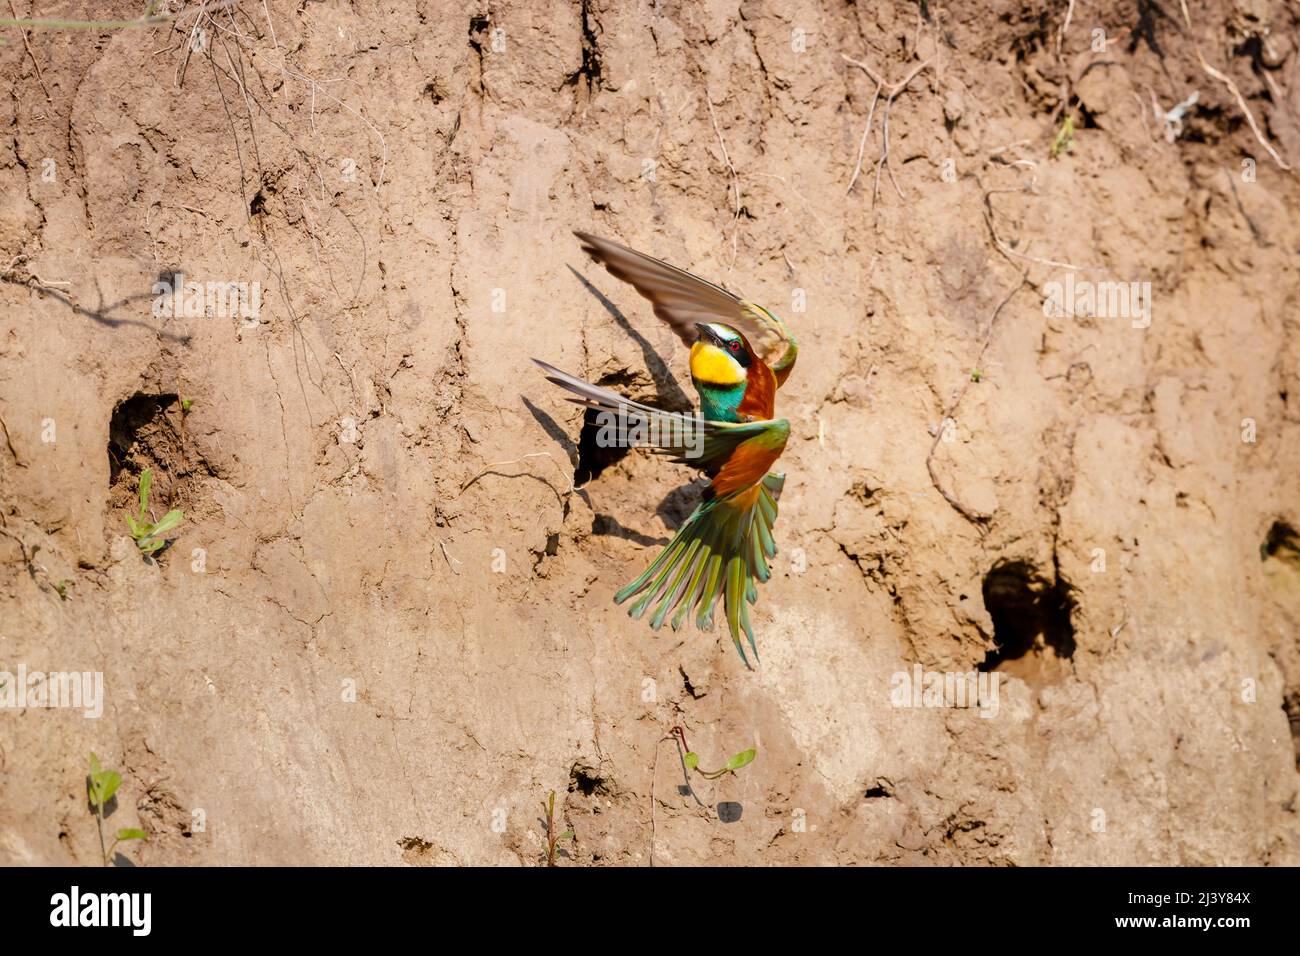 European bee-eater (Merops apiaster) takes off and flies away from its nesting hole in a sandy bank, Koros-Maros National Park, Bekes County, Hungary Stock Photo